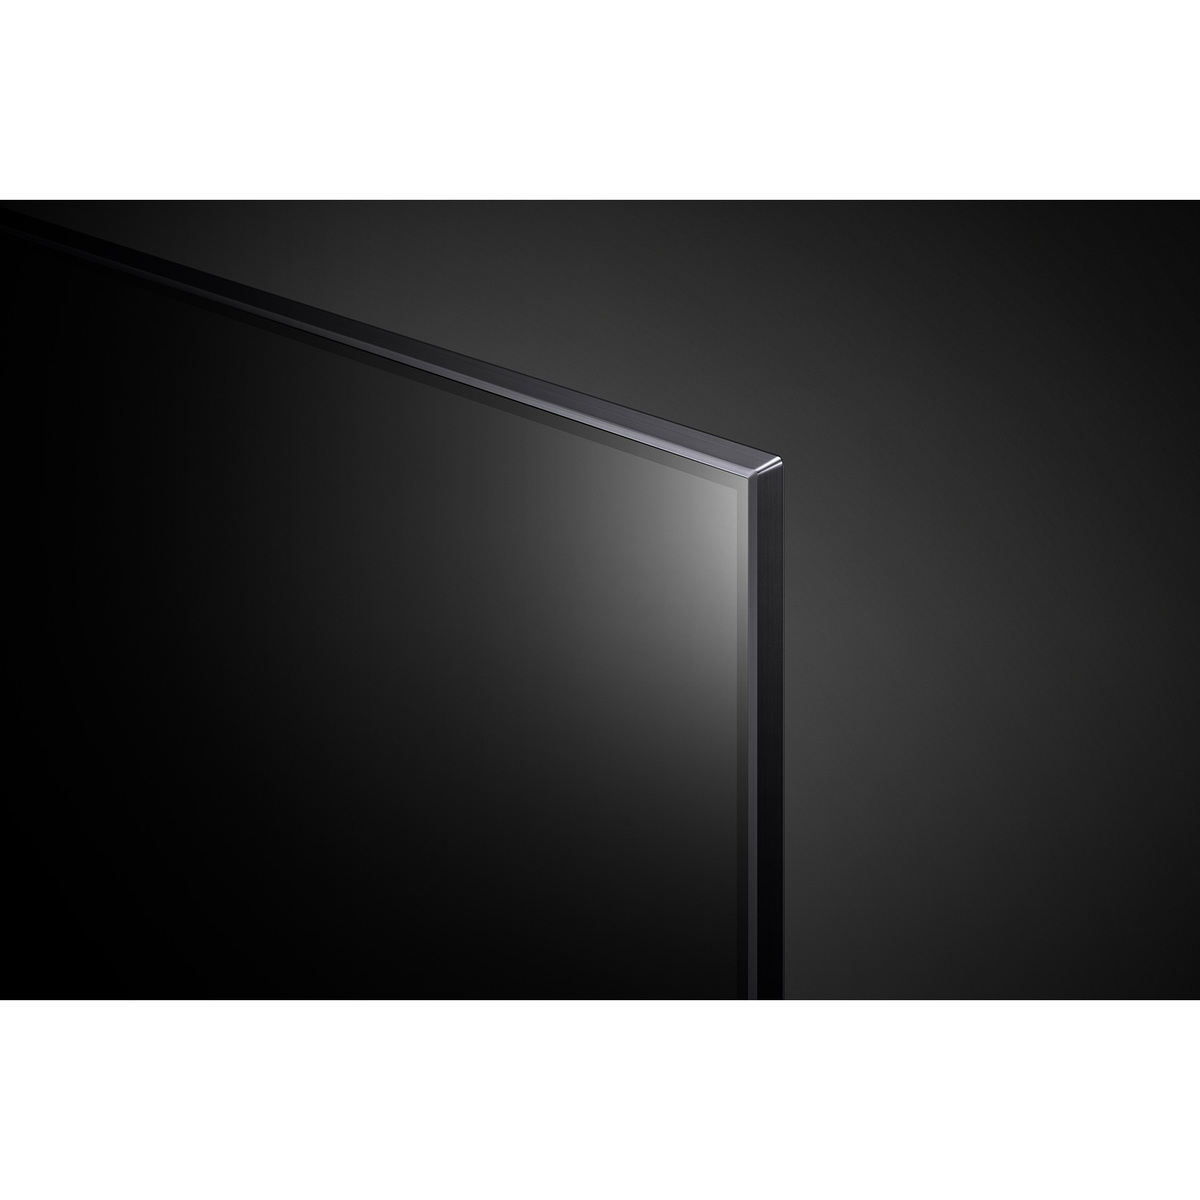 LG QNED 55 Inch TV With 4K Active HDR Cinema Screen Design, with Magic remote, HDR, WebOS from the QNED80 Series